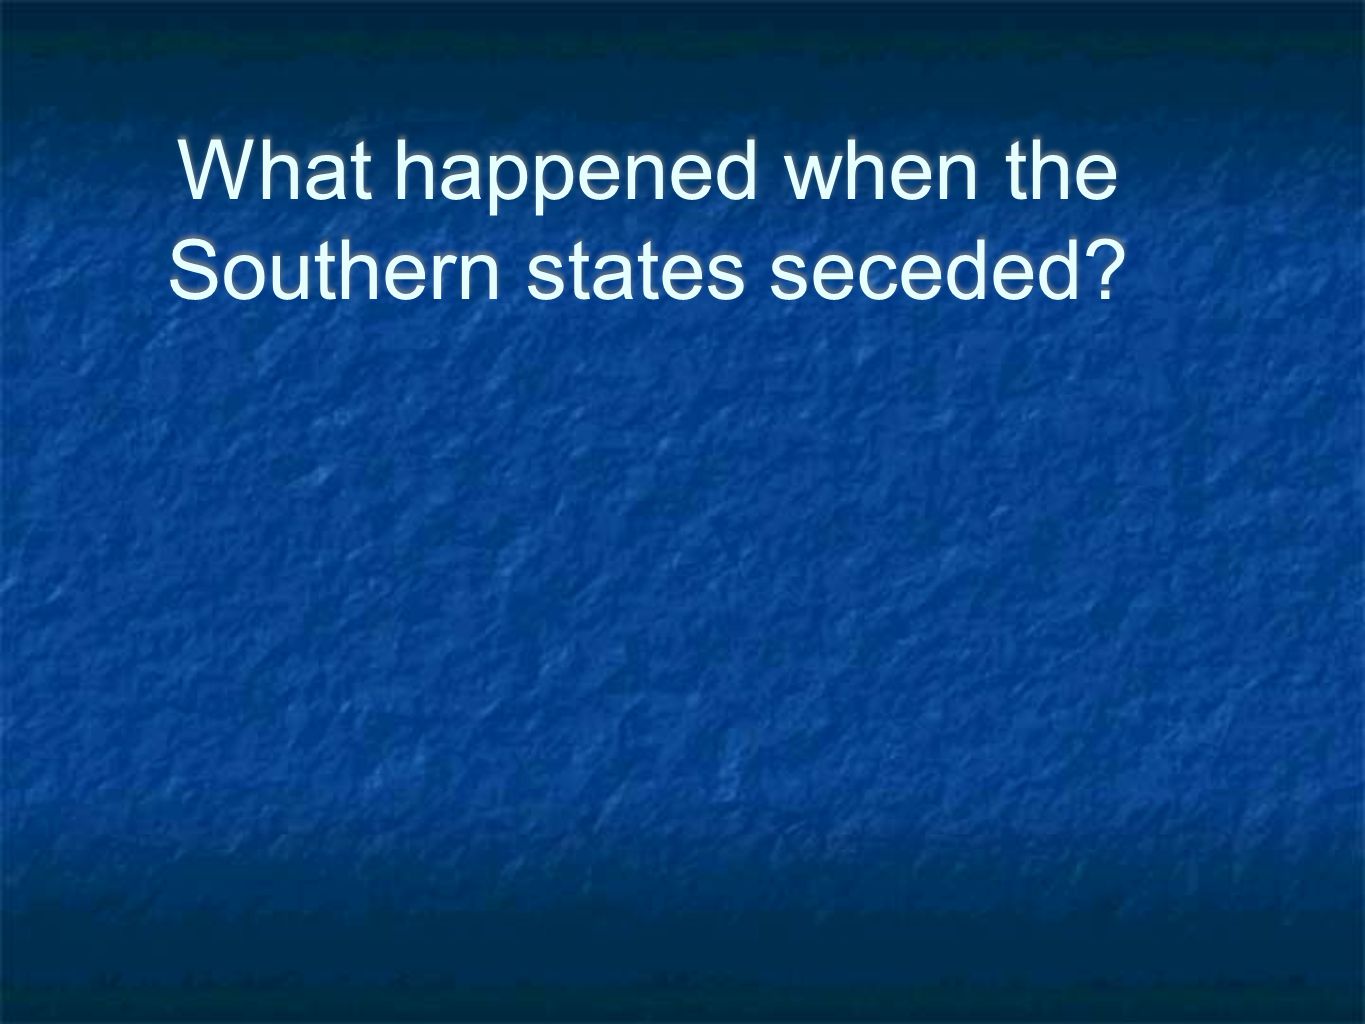 What happened when the Southern states seceded